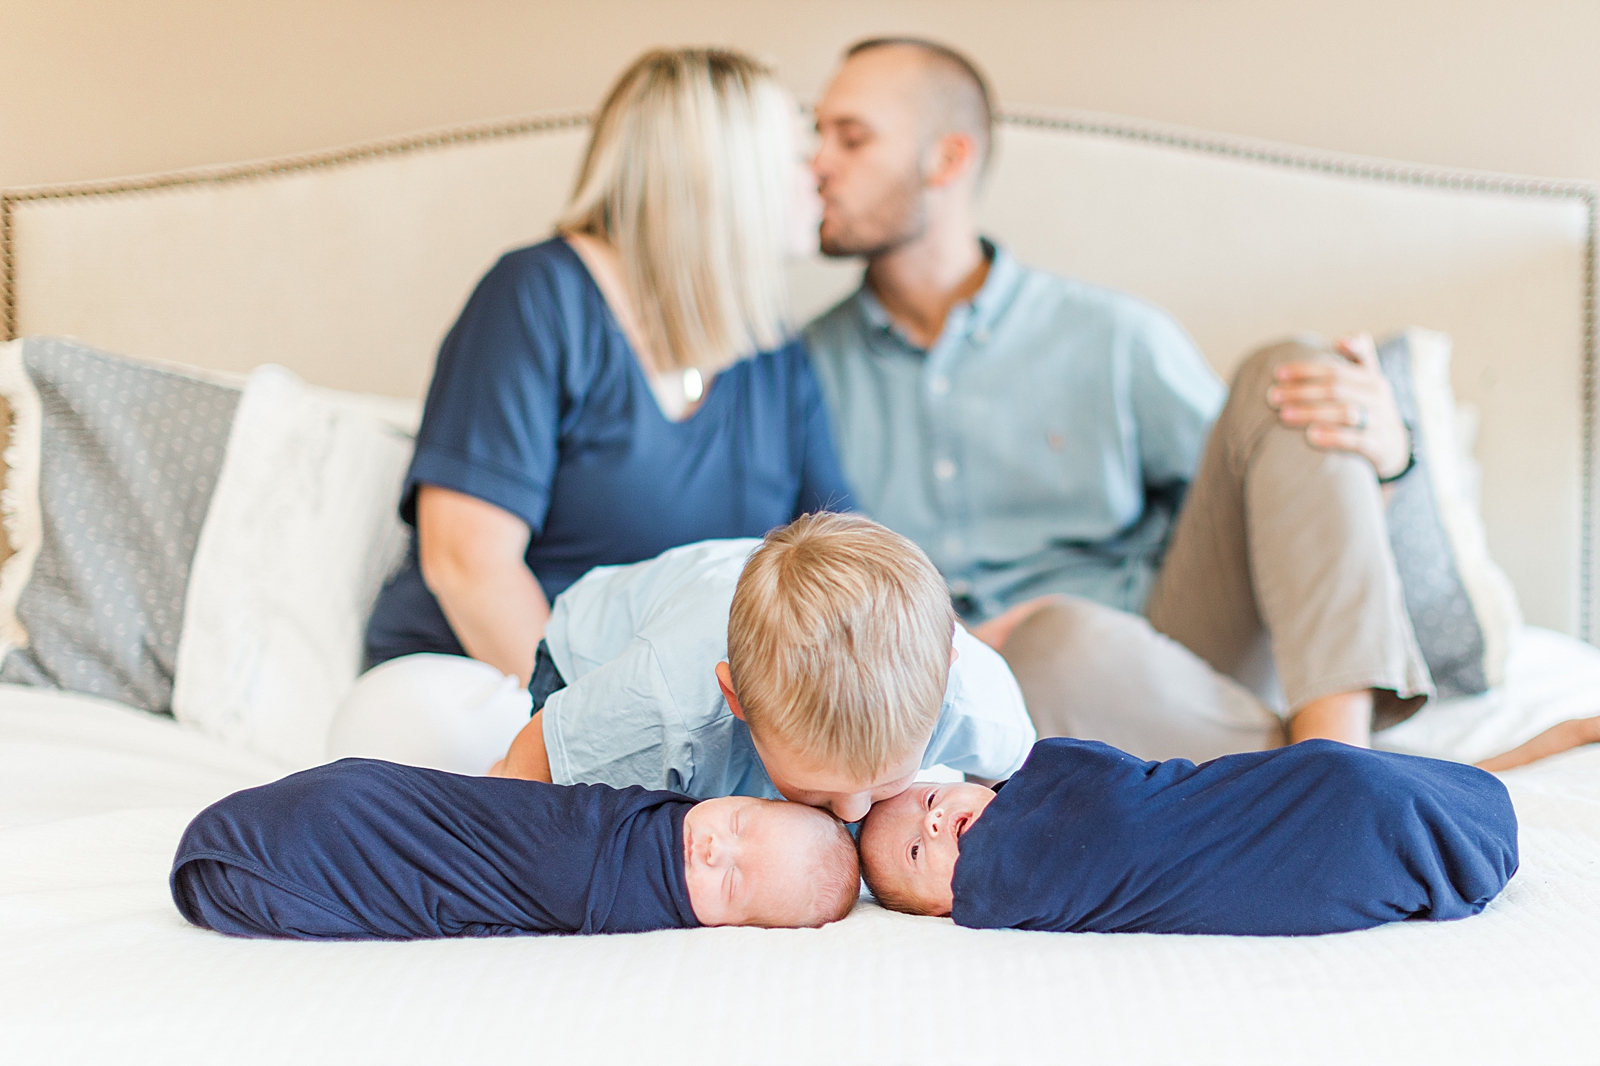 mom and dad share a kiss out of focus in the background while toddler boy kisses his twin newborn brothers on the head in front of them during lifestyle photos